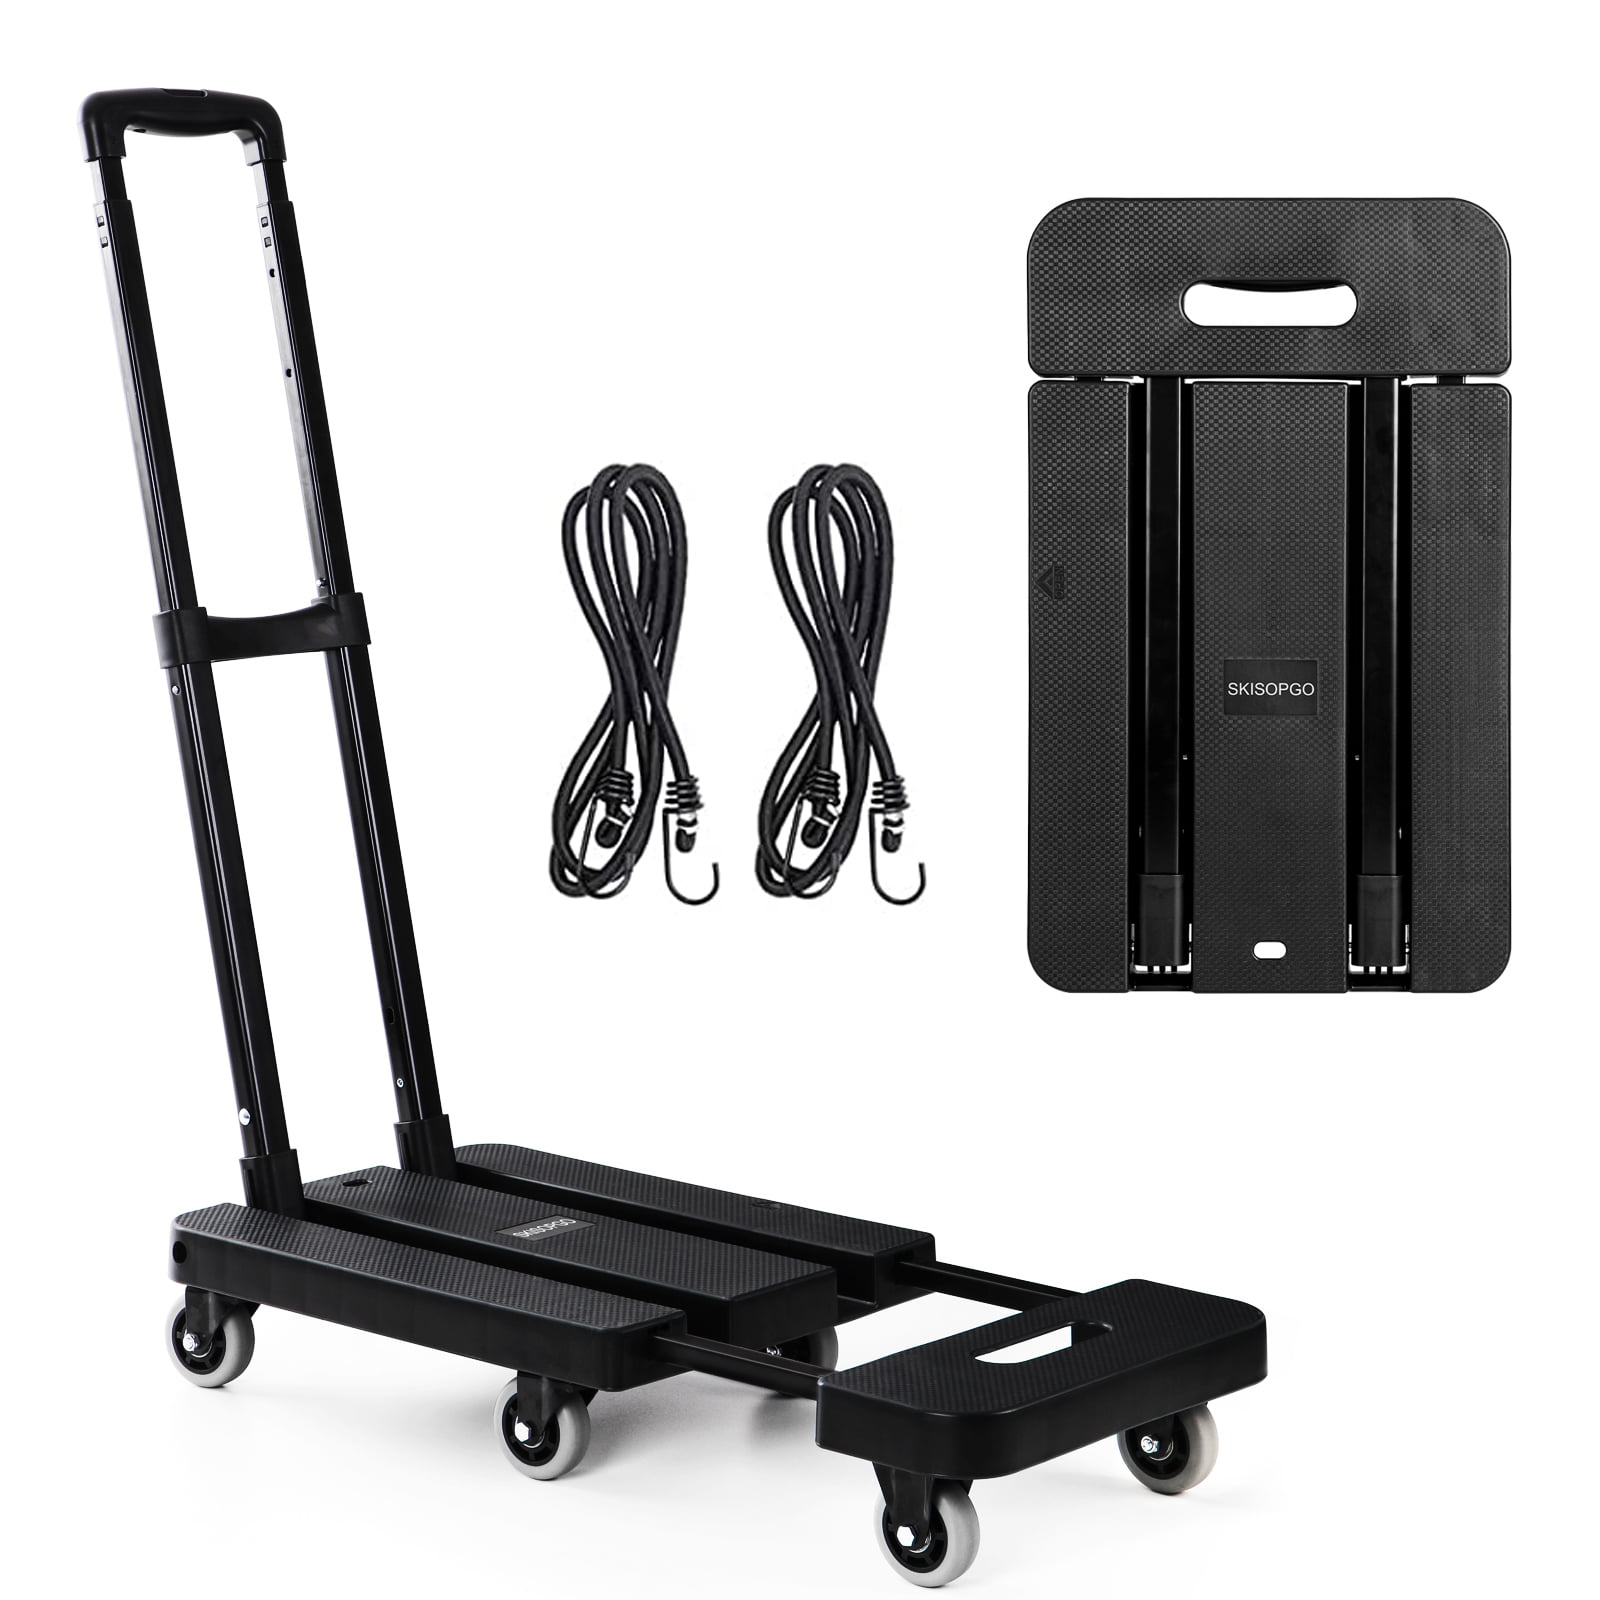 Utility Dolly Platform Cart with 4 Rotate Wheels and 2 Elastic Ropes for Moving Travel Shopping Office Use Black 130 lbs Capacity Portable Luggage Cart Folding Hand Truck 